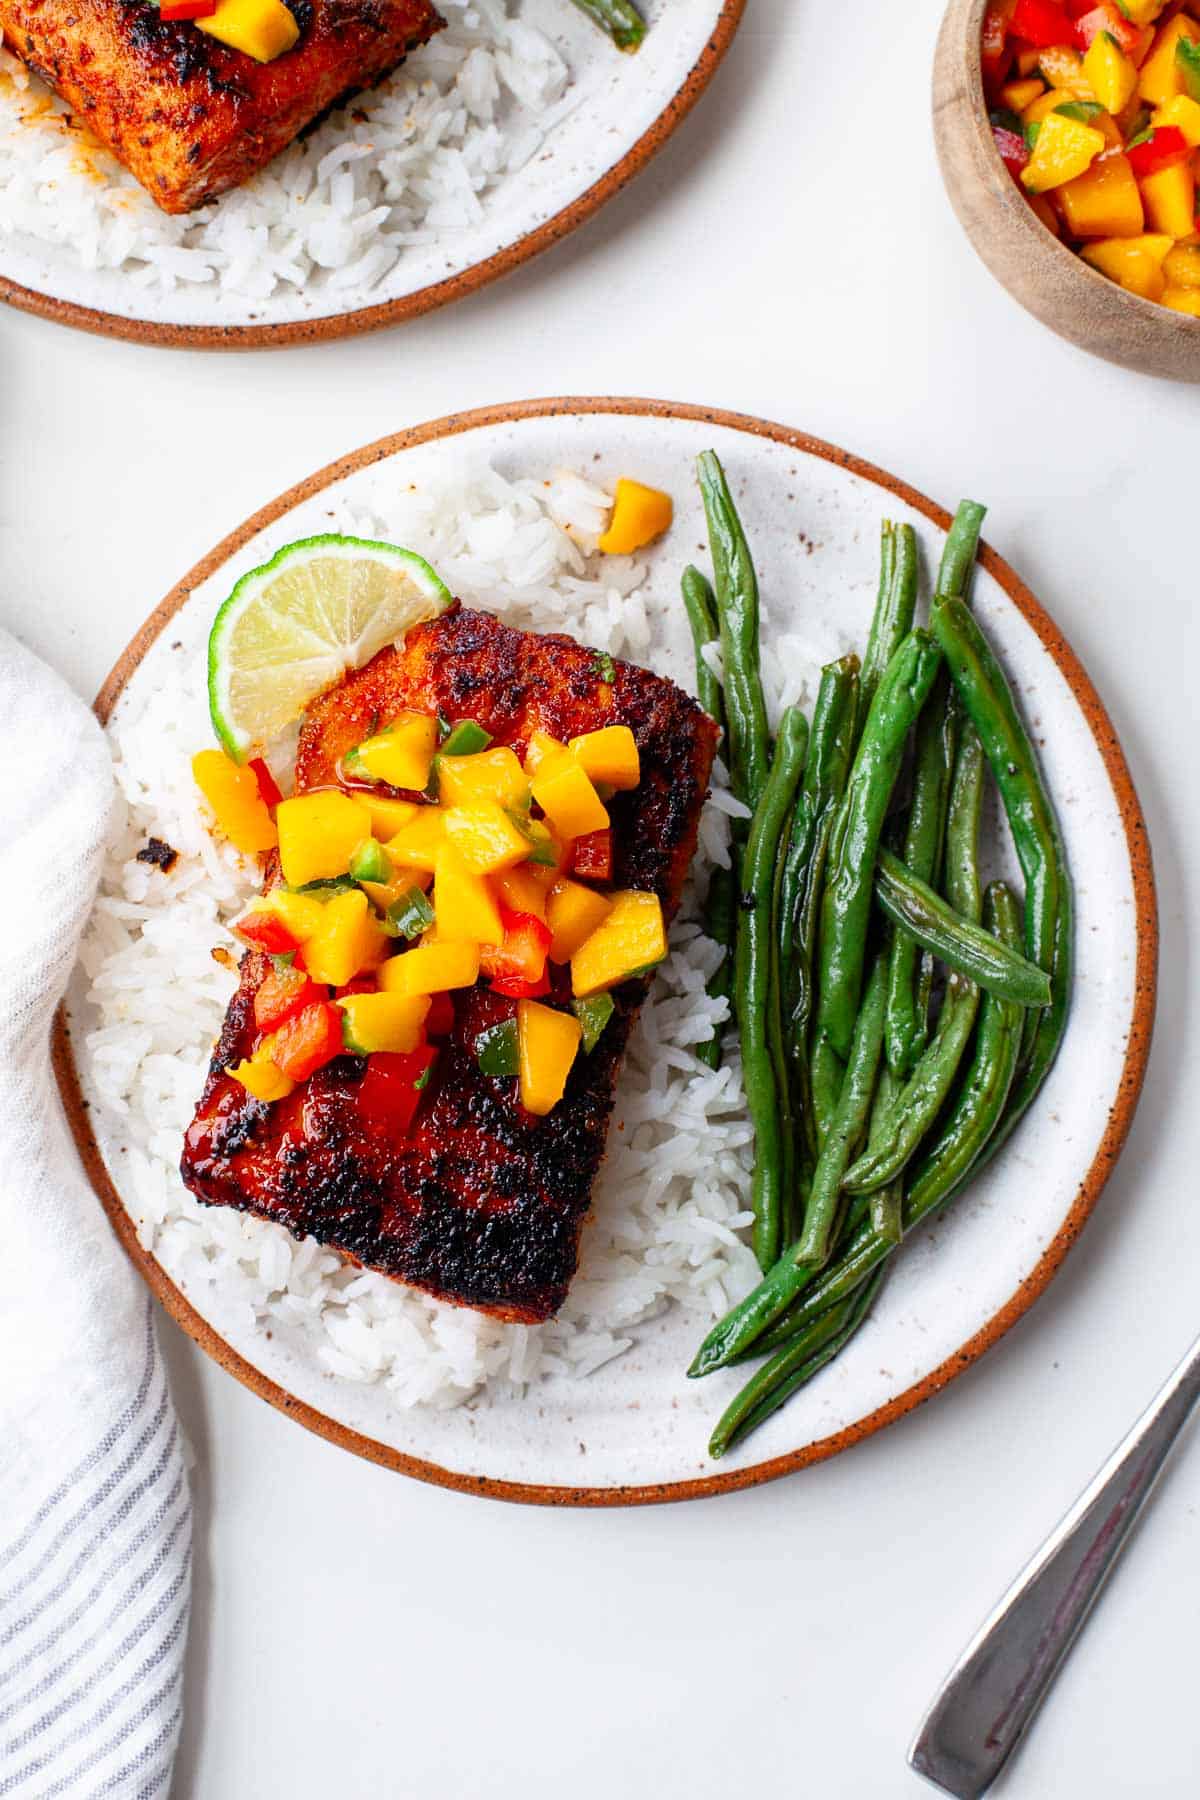 blackened mahi mahi on a bed of white rice, garnished with fresh mango salsa and served with a side of green beans